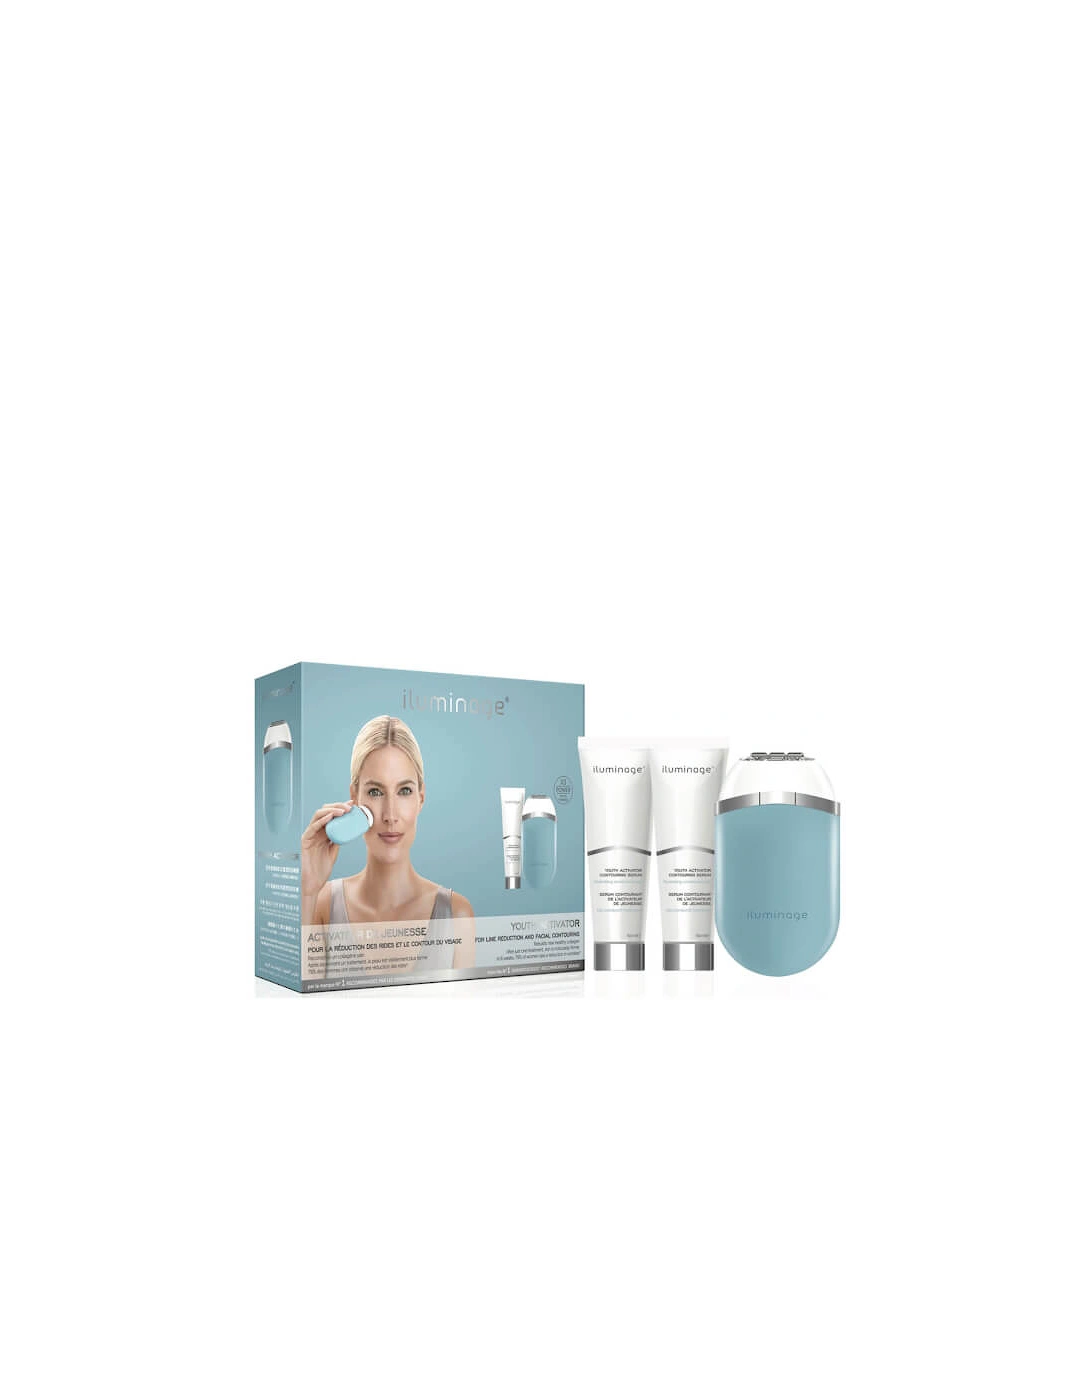 Youth Activator Infrared LED Radio Frequency Anti-Aging Device and 2 Youth Activator Serums (1 kit) - Iluminage, 2 of 1